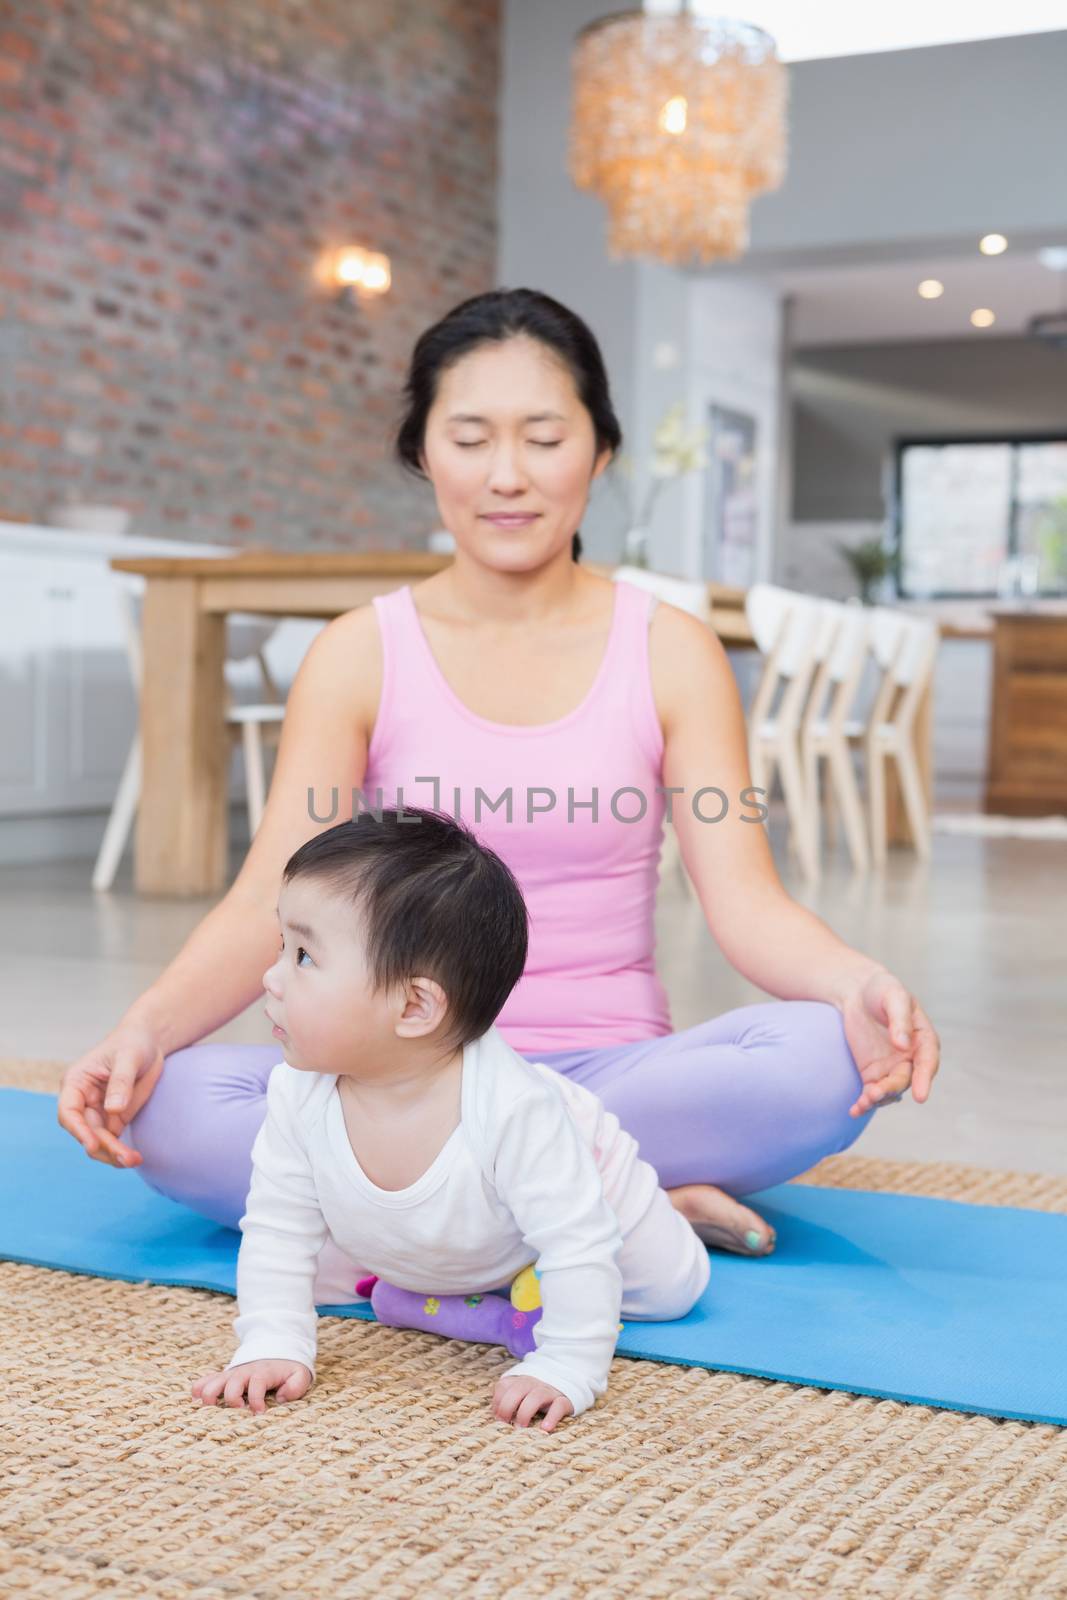 Calm mother meditating on mat at home by Wavebreakmedia